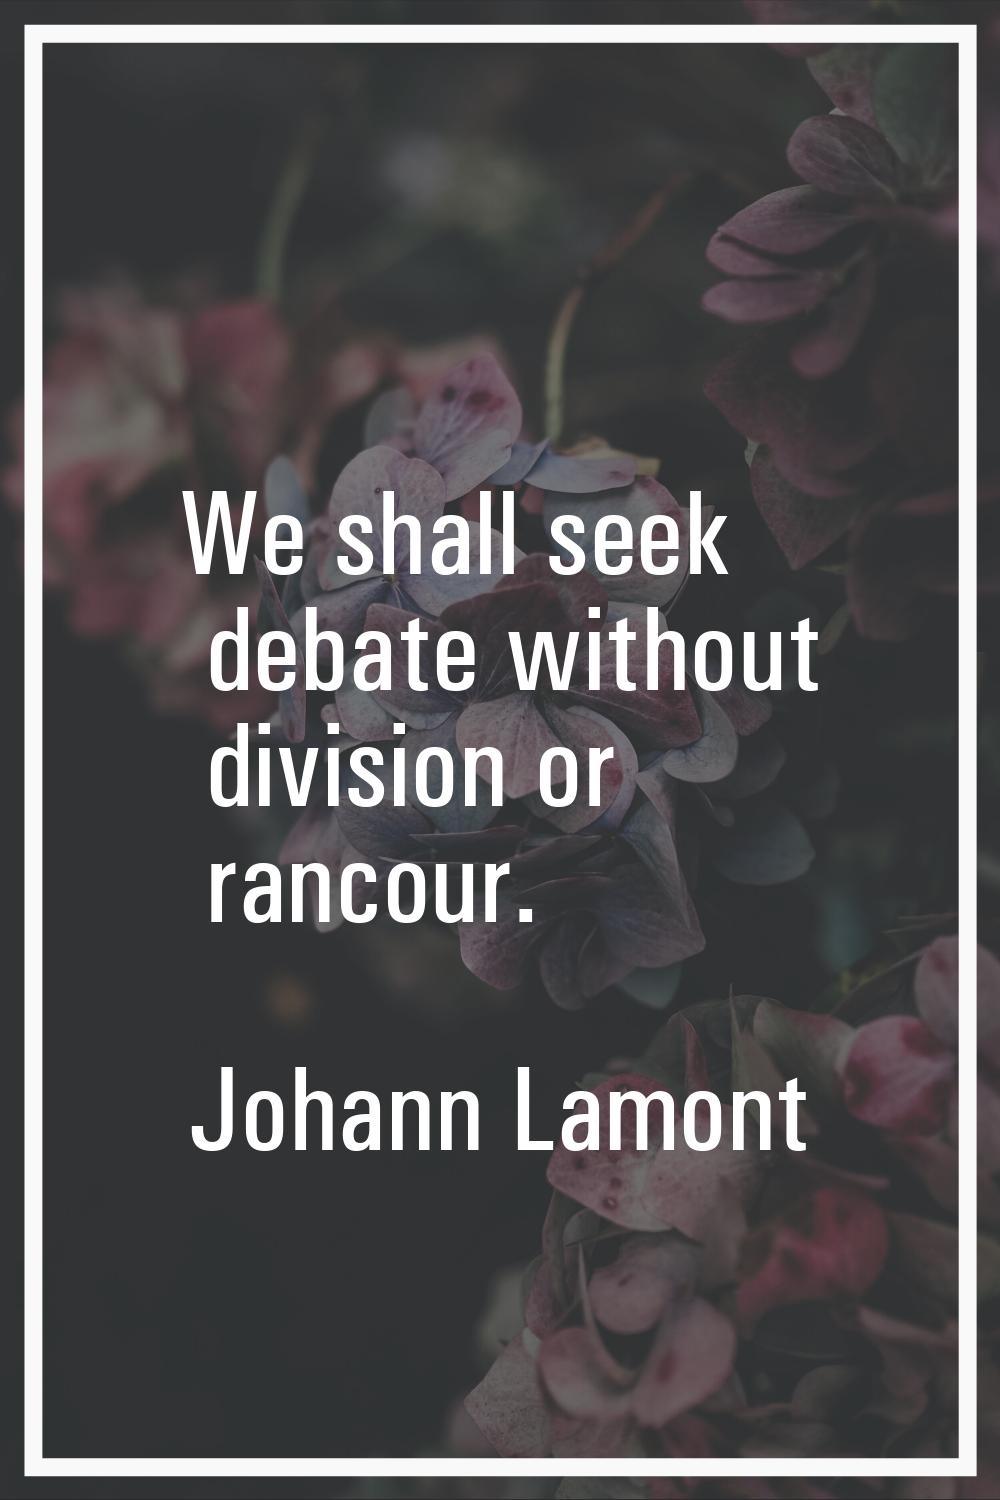 We shall seek debate without division or rancour.